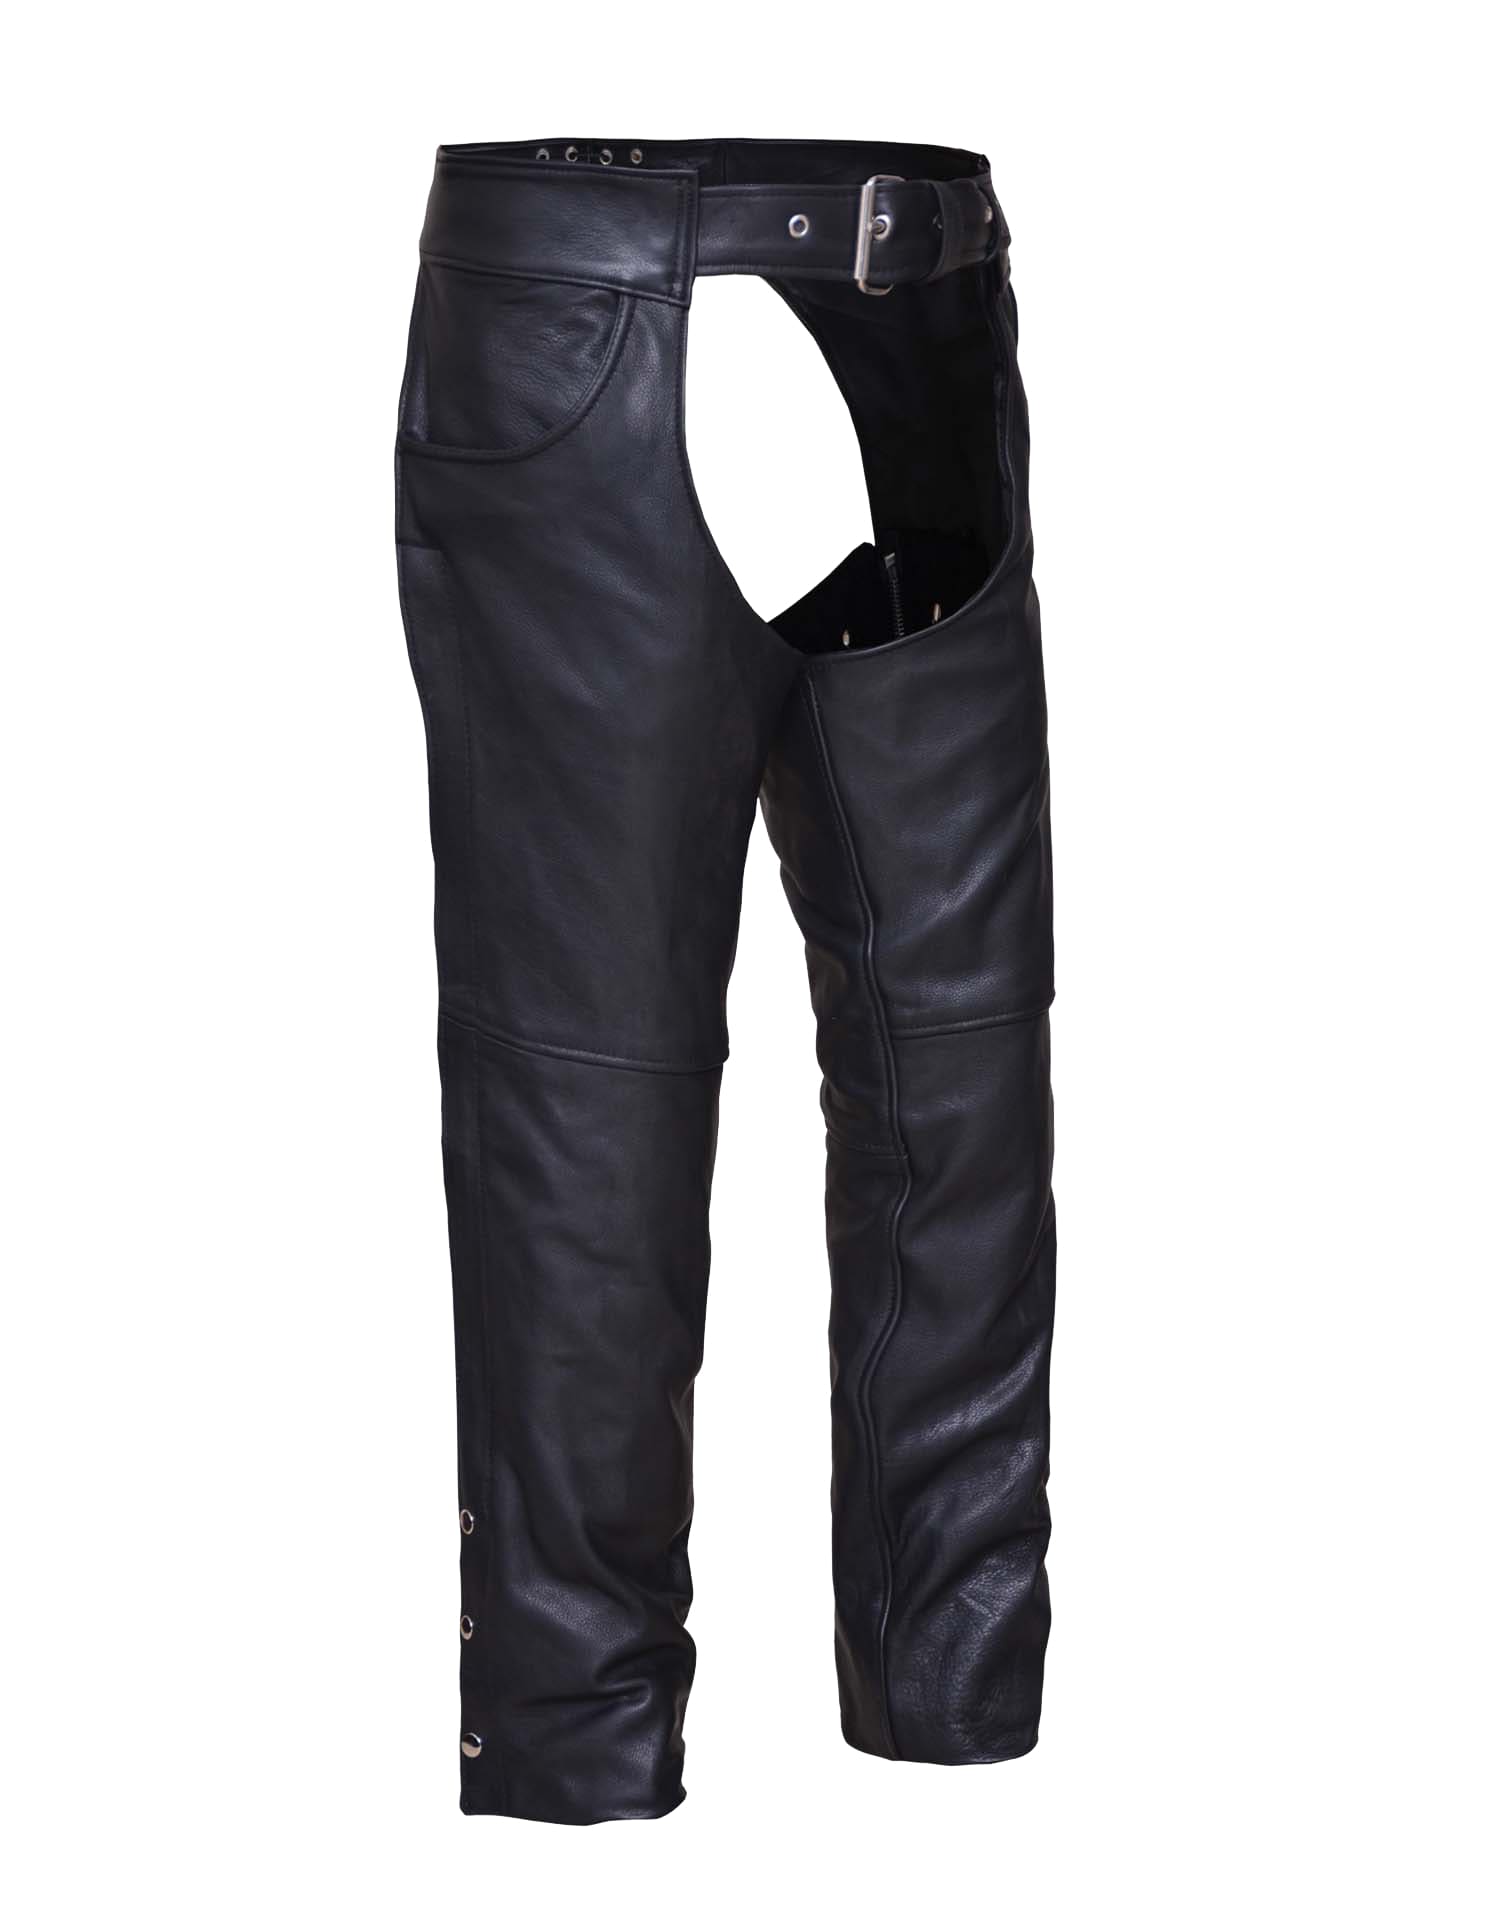 Unisex Naked Leather Jean Pocket Motorcycle Chaps